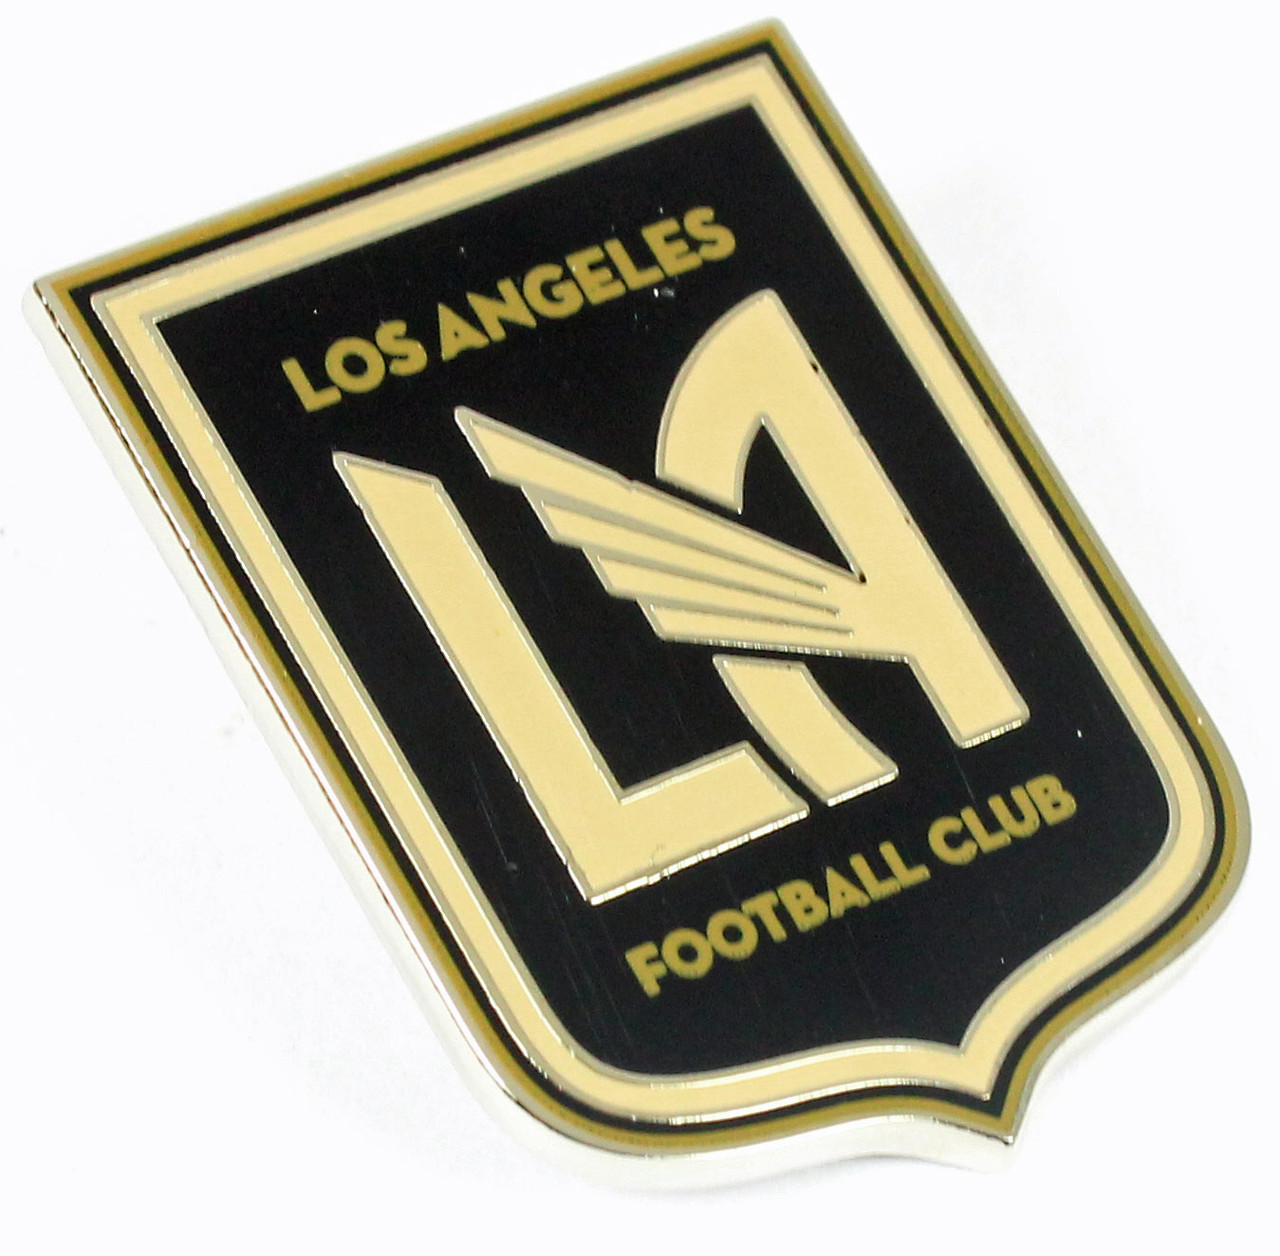 LAFC Champions Patch MLS Los Angeles Soccer Patches 